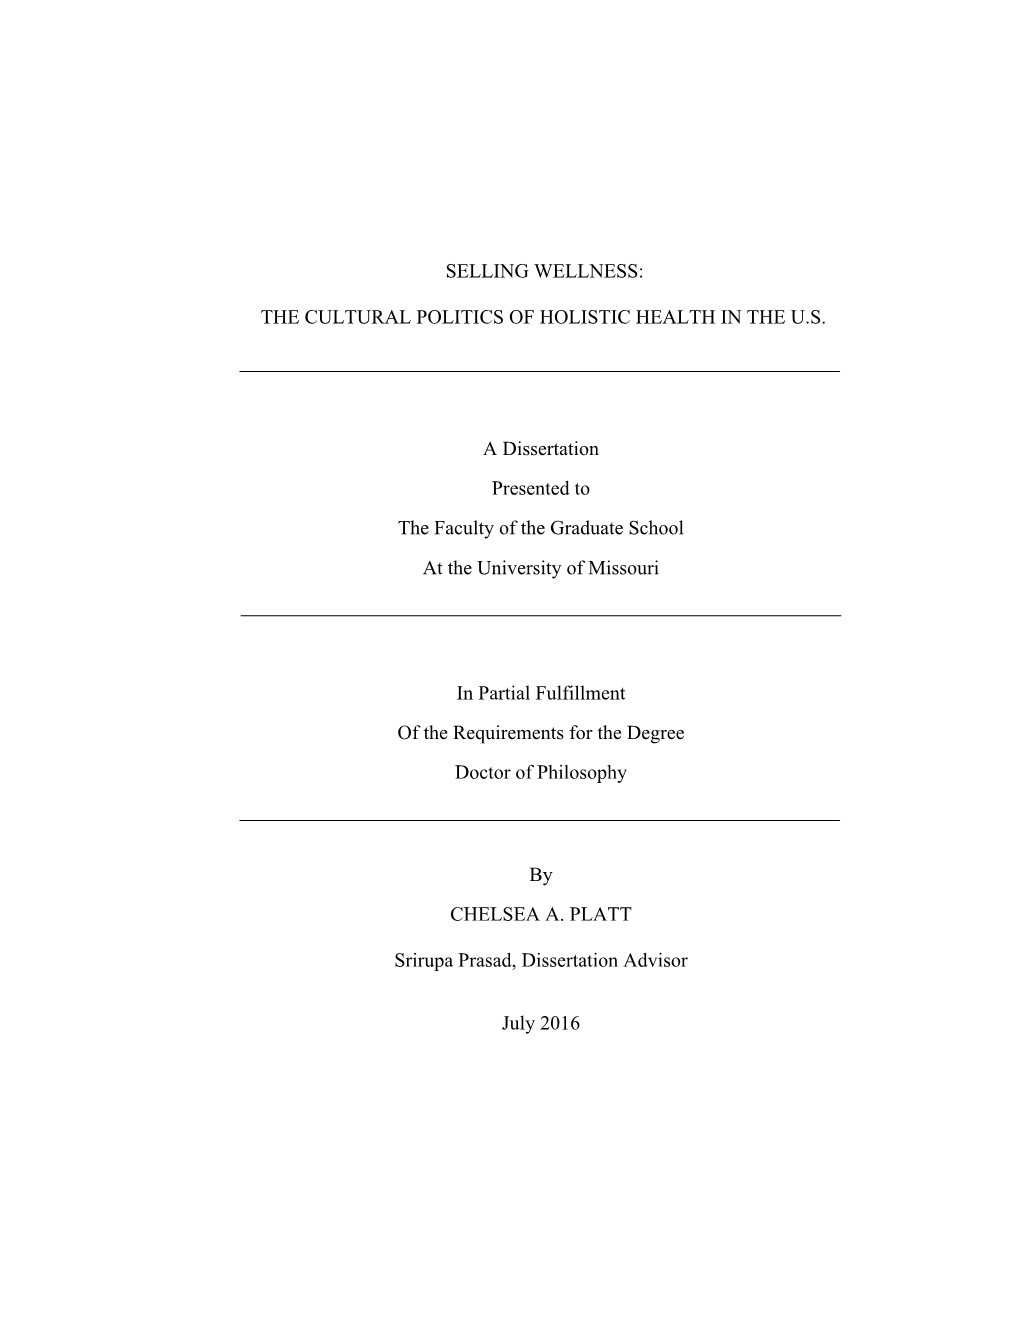 SELLING WELLNESS: the CULTURAL POLITICS of HOLISTIC HEALTH in the U.S. a Dissertation Presented to the Faculty of the Graduate S